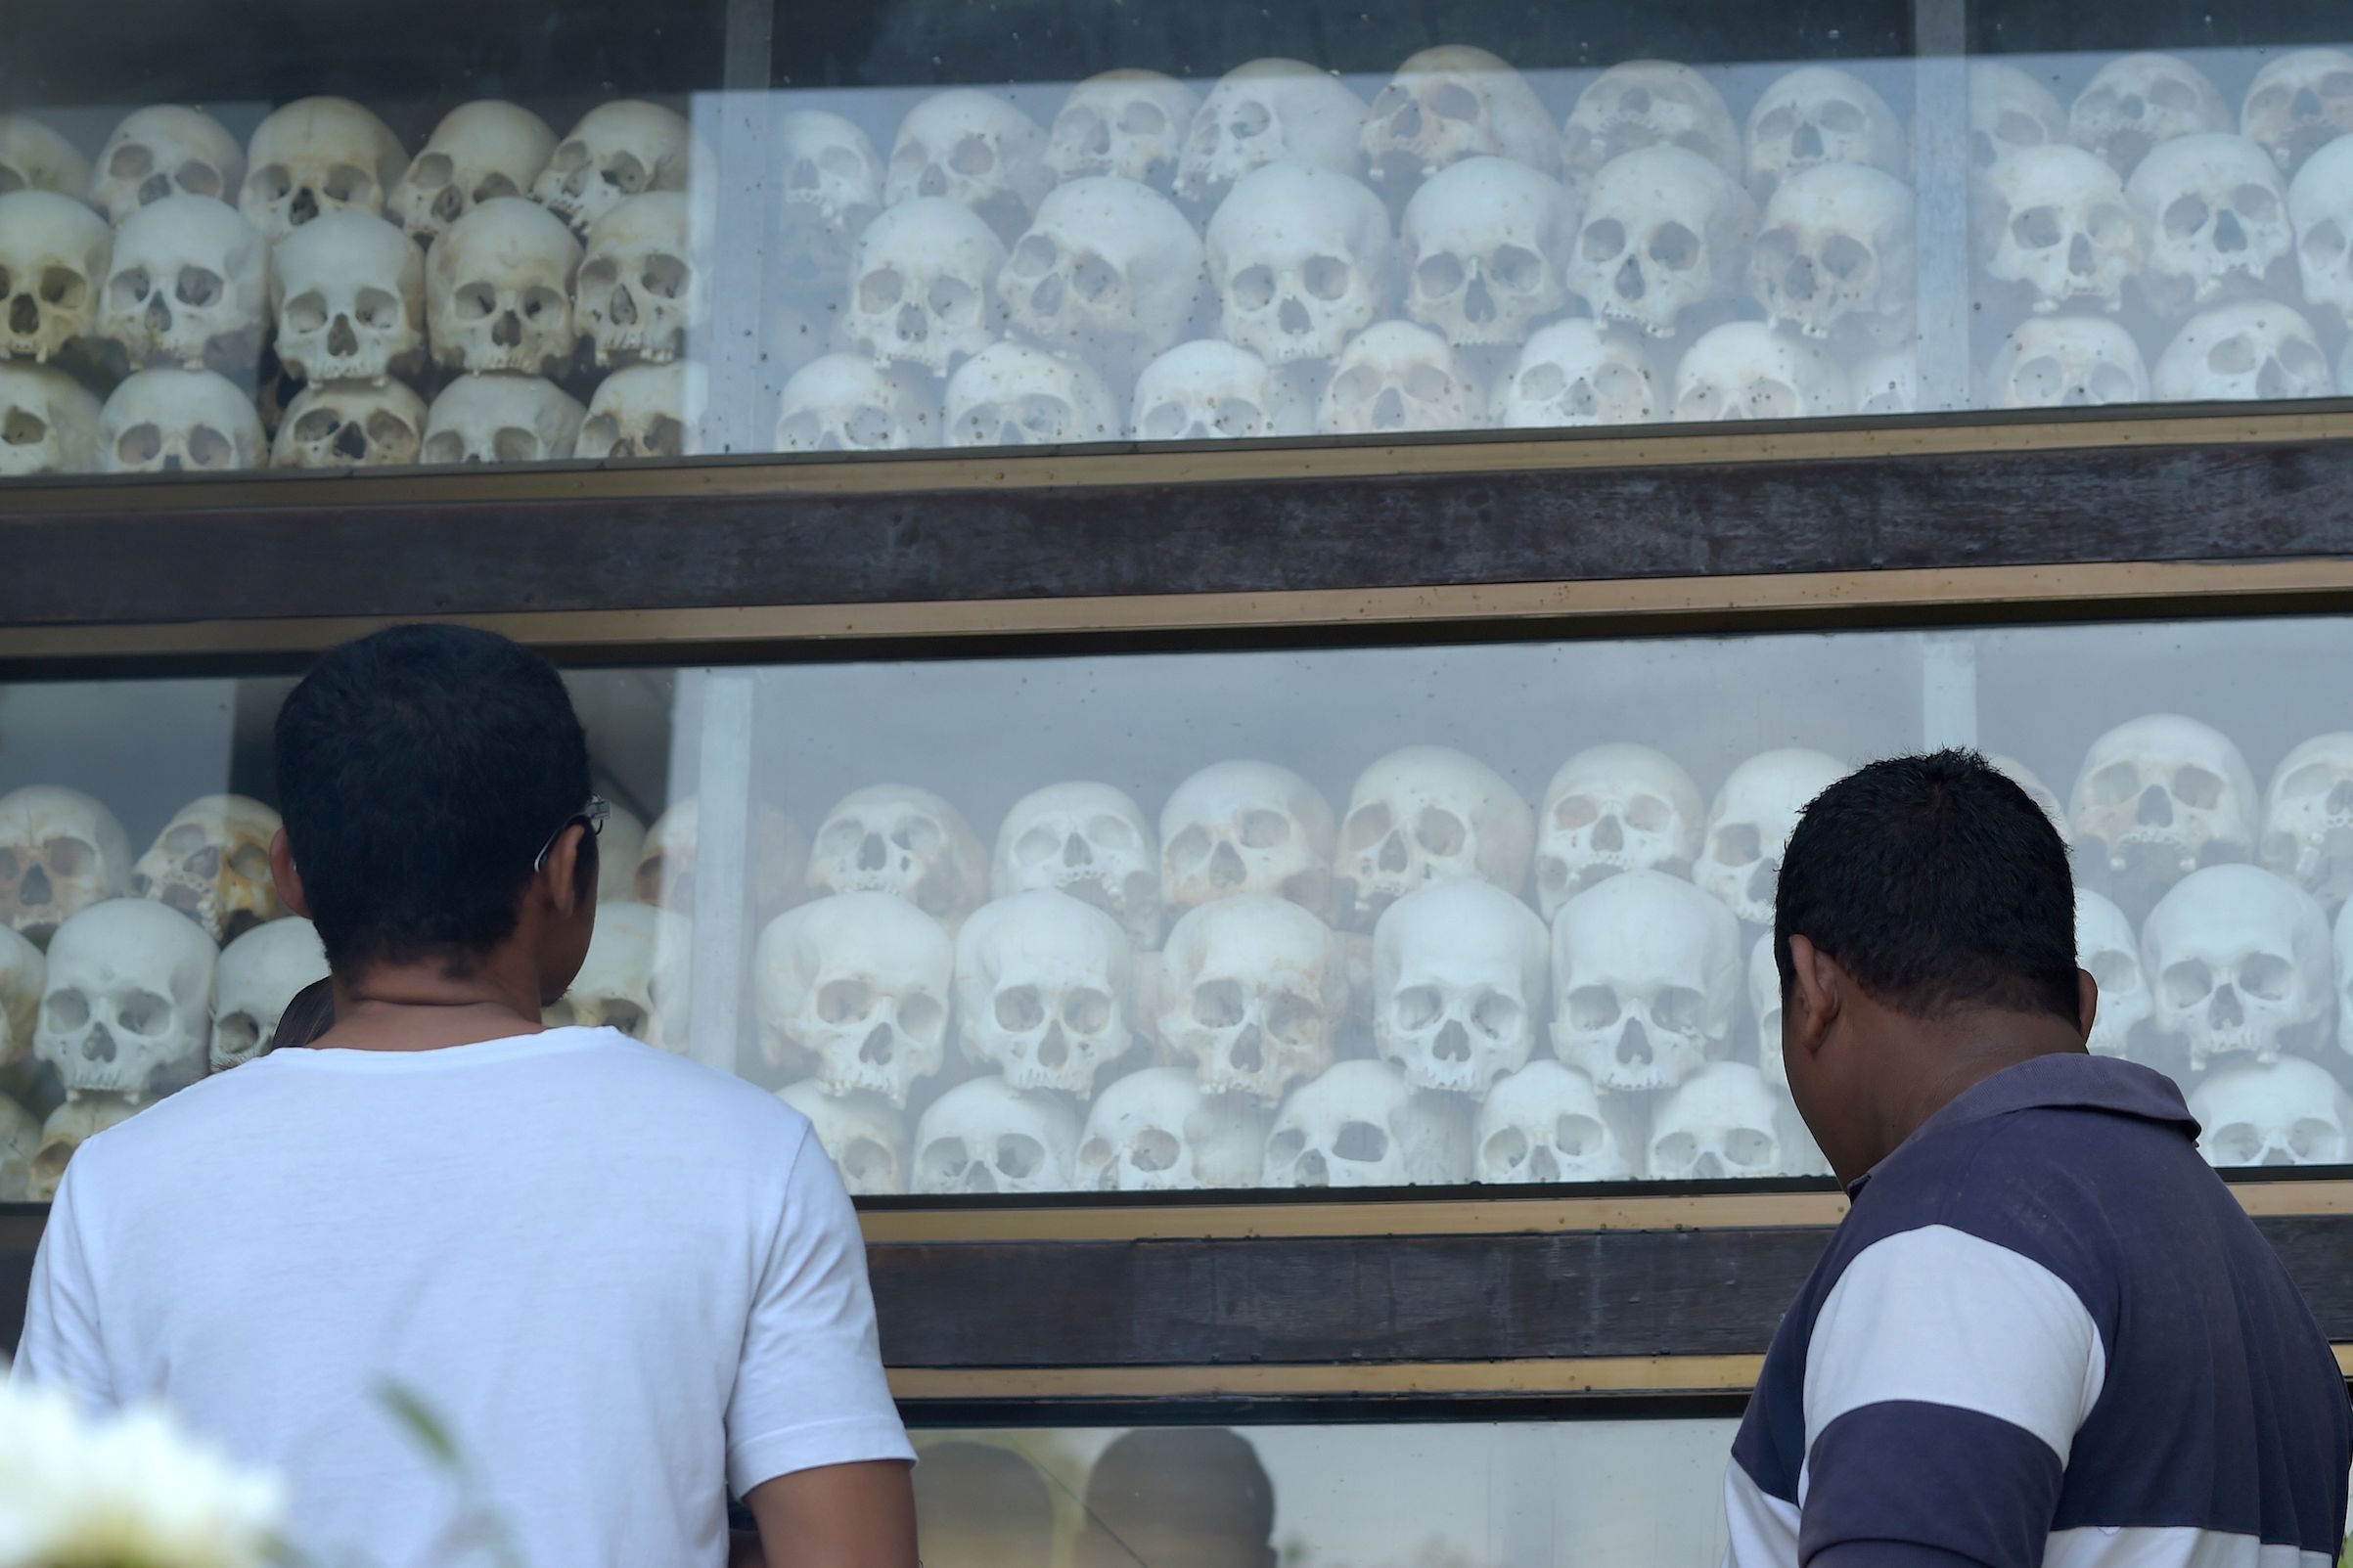 CAMBODIA-HISTORY-KROUGE-GENOCIDE